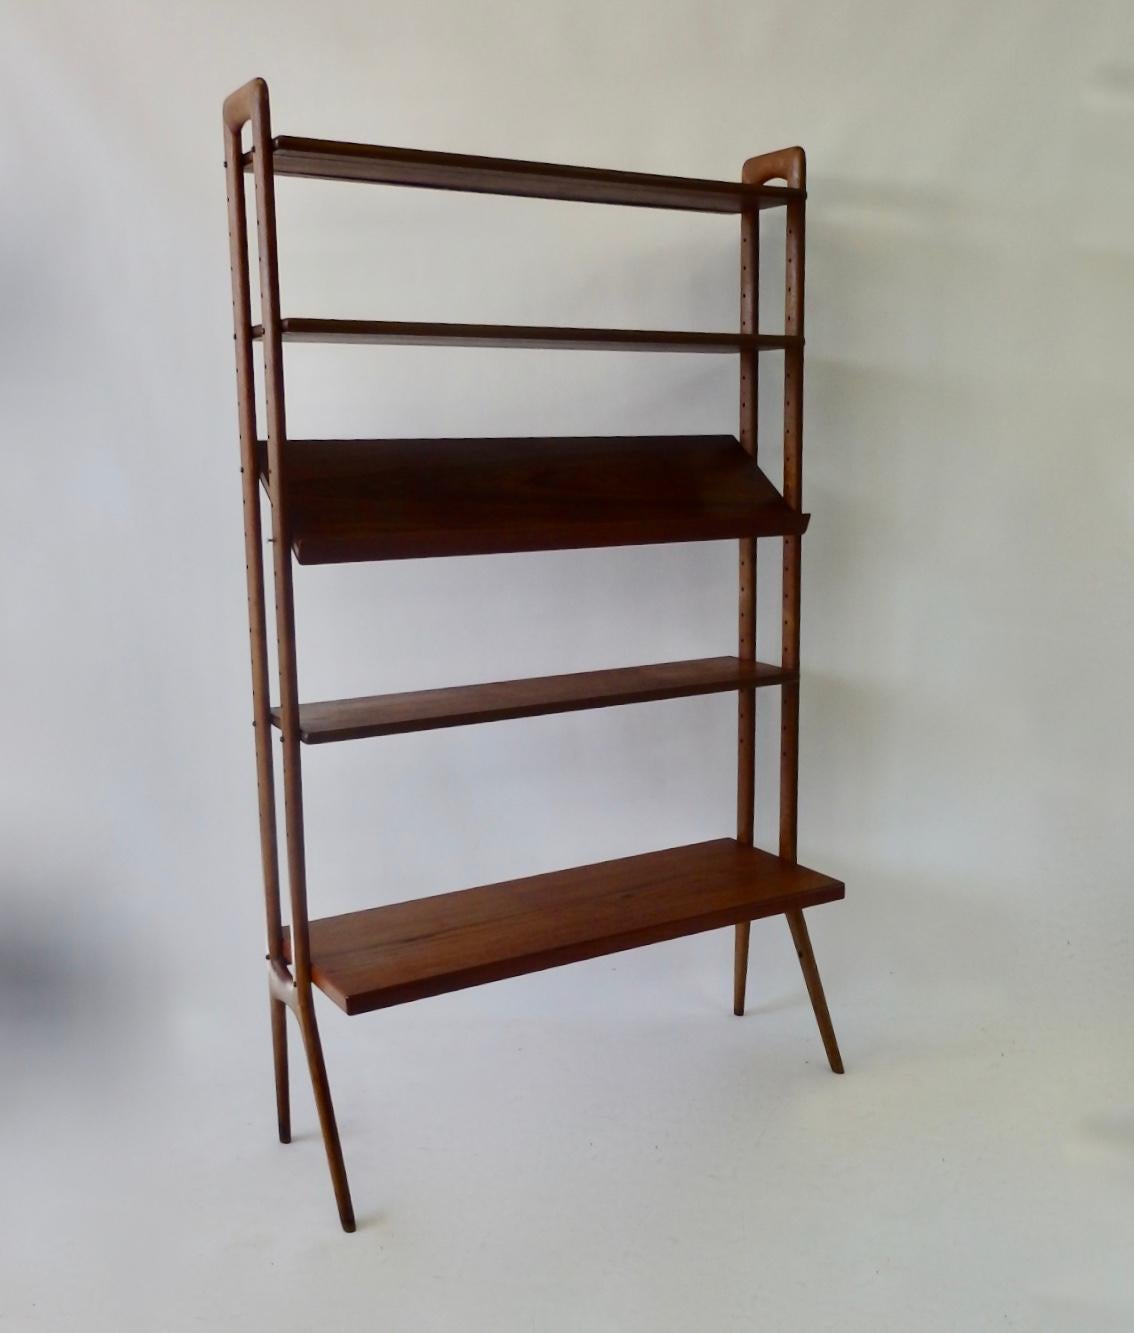 Modular and adjustable Danish teak wood free standing bookshelf or room divider. Designed by Kurt Ostervig crafted by Povl Dinesen. Five shelves one having an angled magazine or book display shelf. Lower shelf is deeper at 15.75